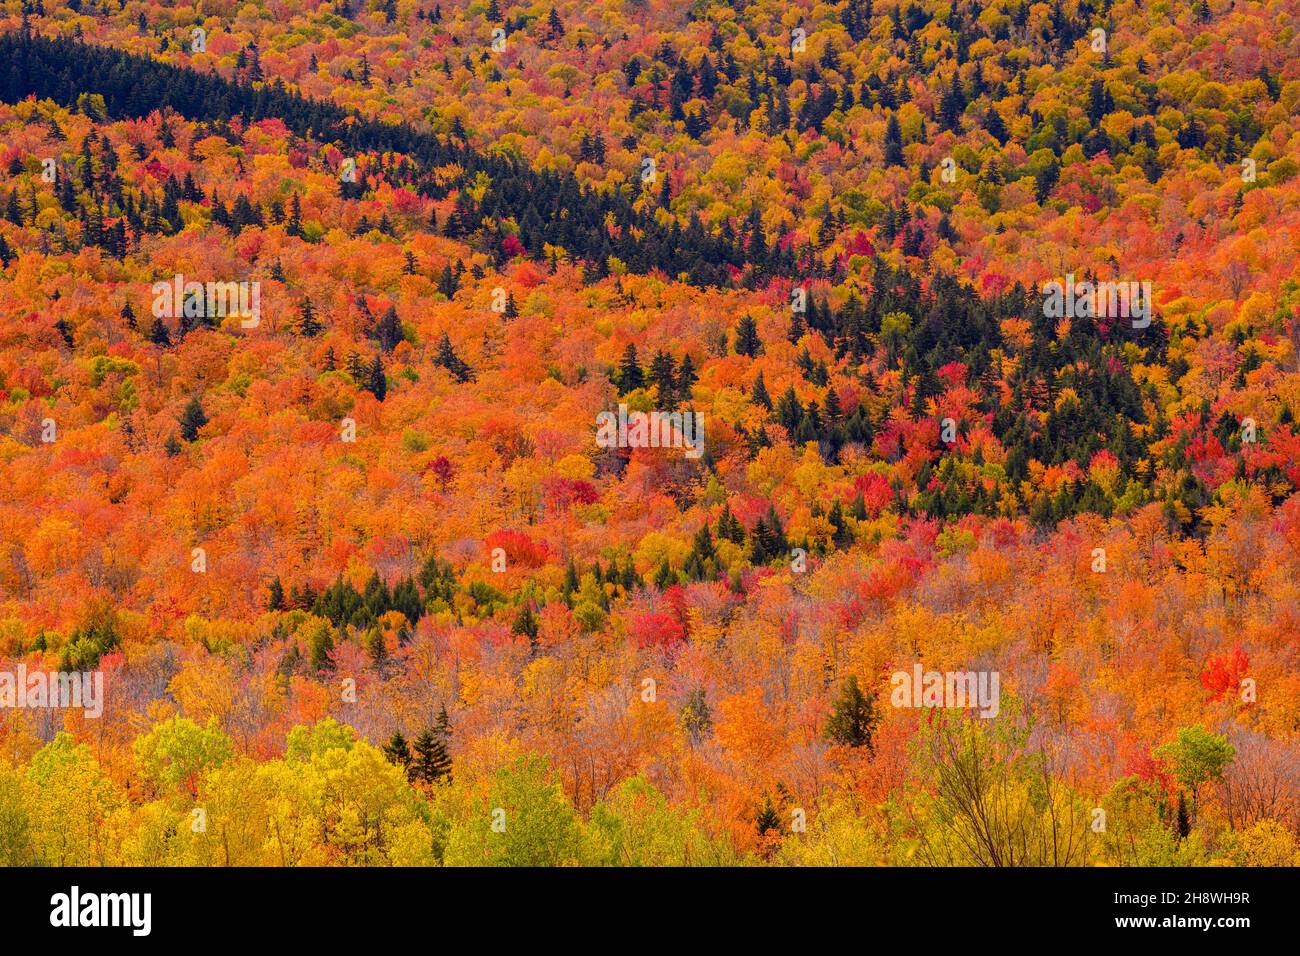 Autumn foliage in the deciduous forest on New England hillsides, Gorham, New Hampshire, USA Stock Photo